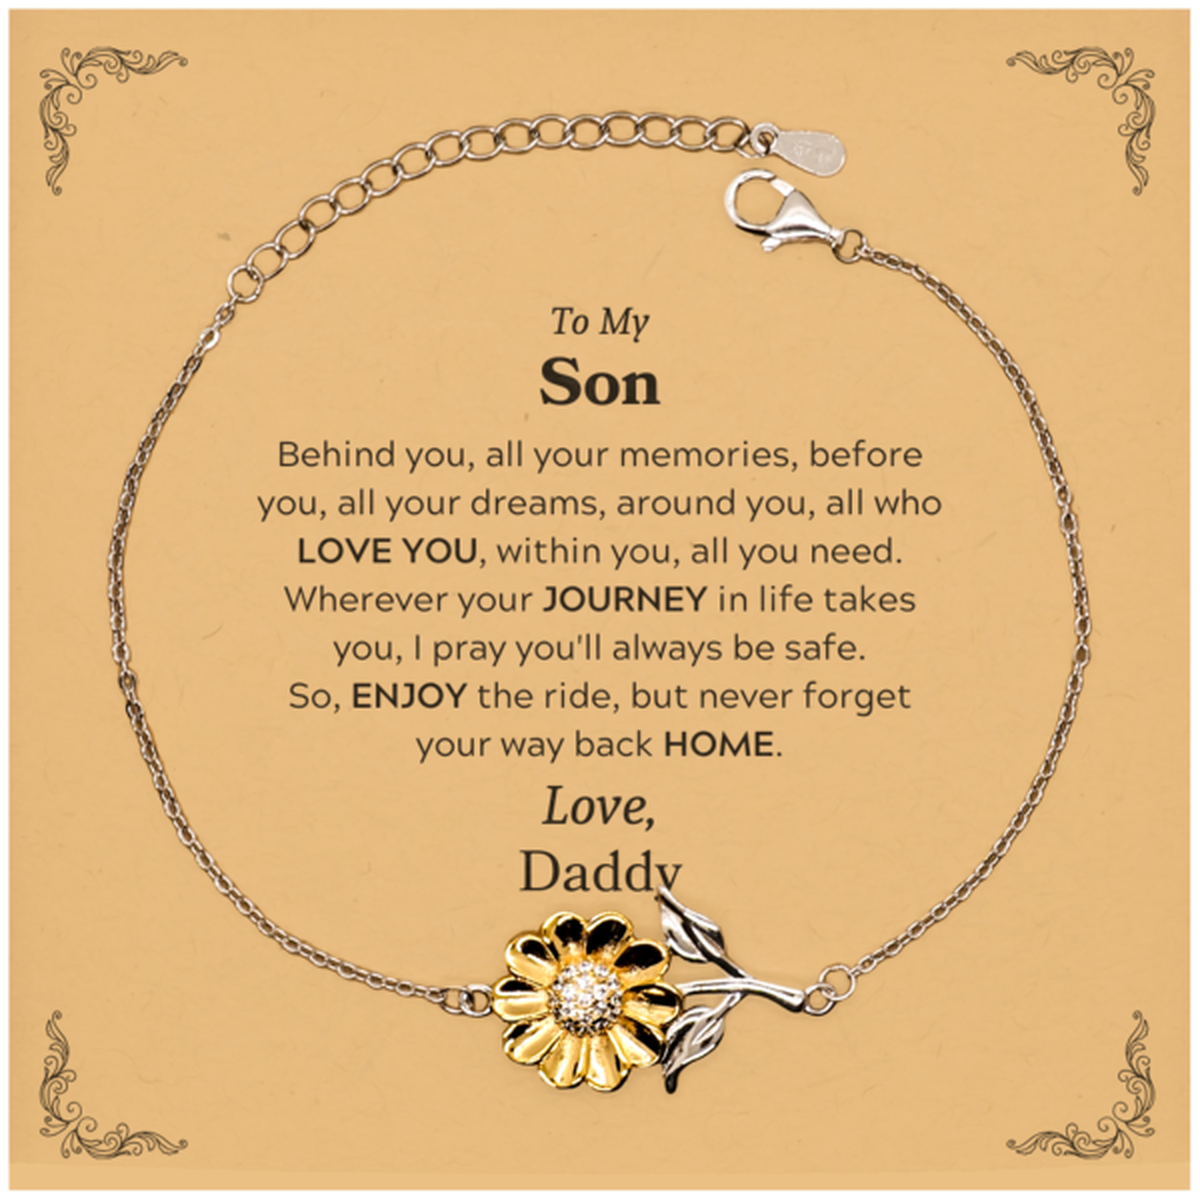 To My Son Graduation Gifts from Daddy, Son Sunflower Bracelet Christmas Birthday Gifts for Son Behind you, all your memories, before you, all your dreams. Love, Daddy